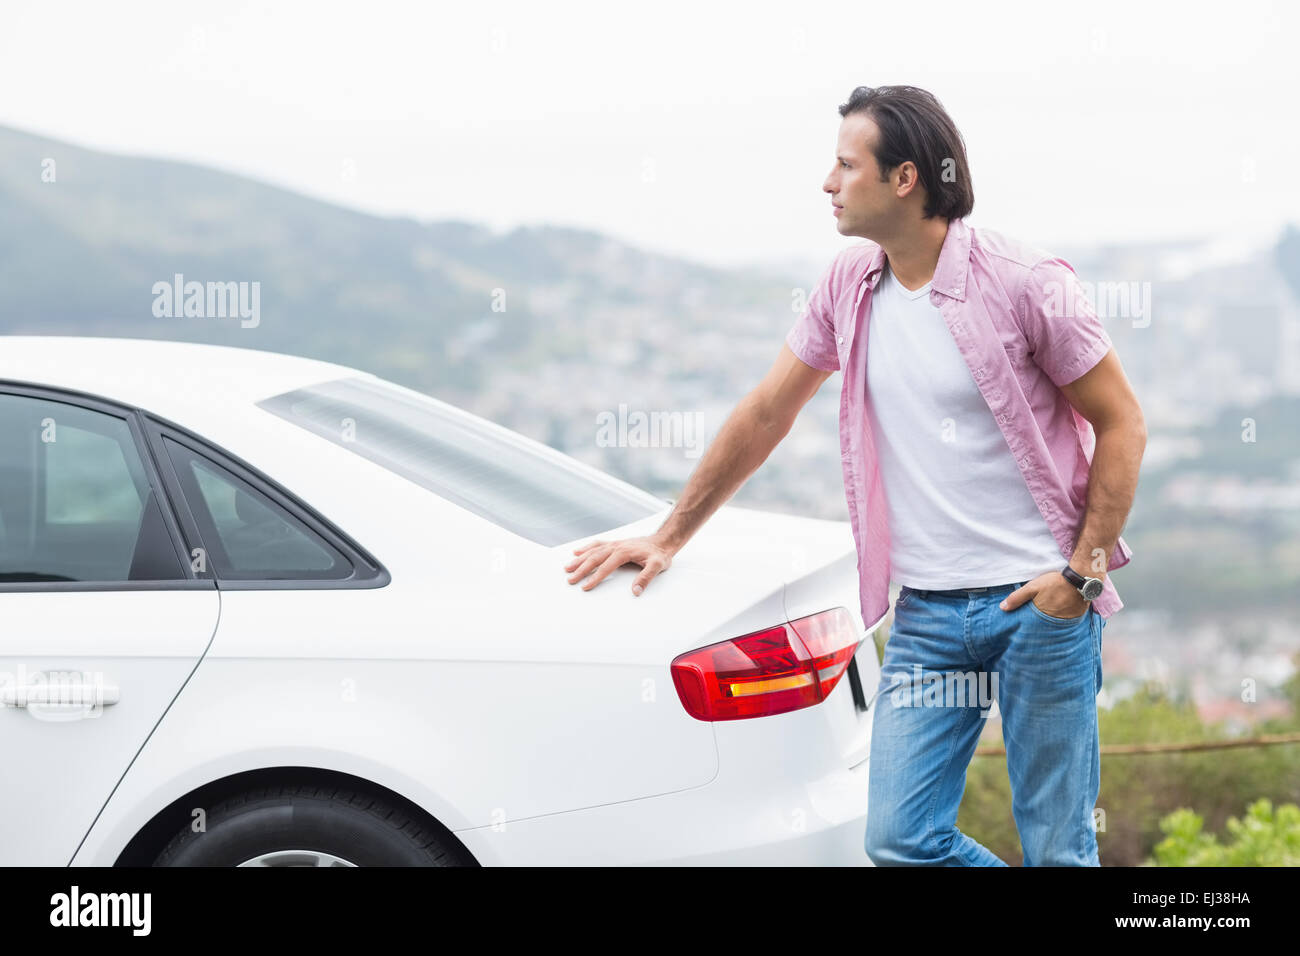 Man standing next to his car Stock Photo